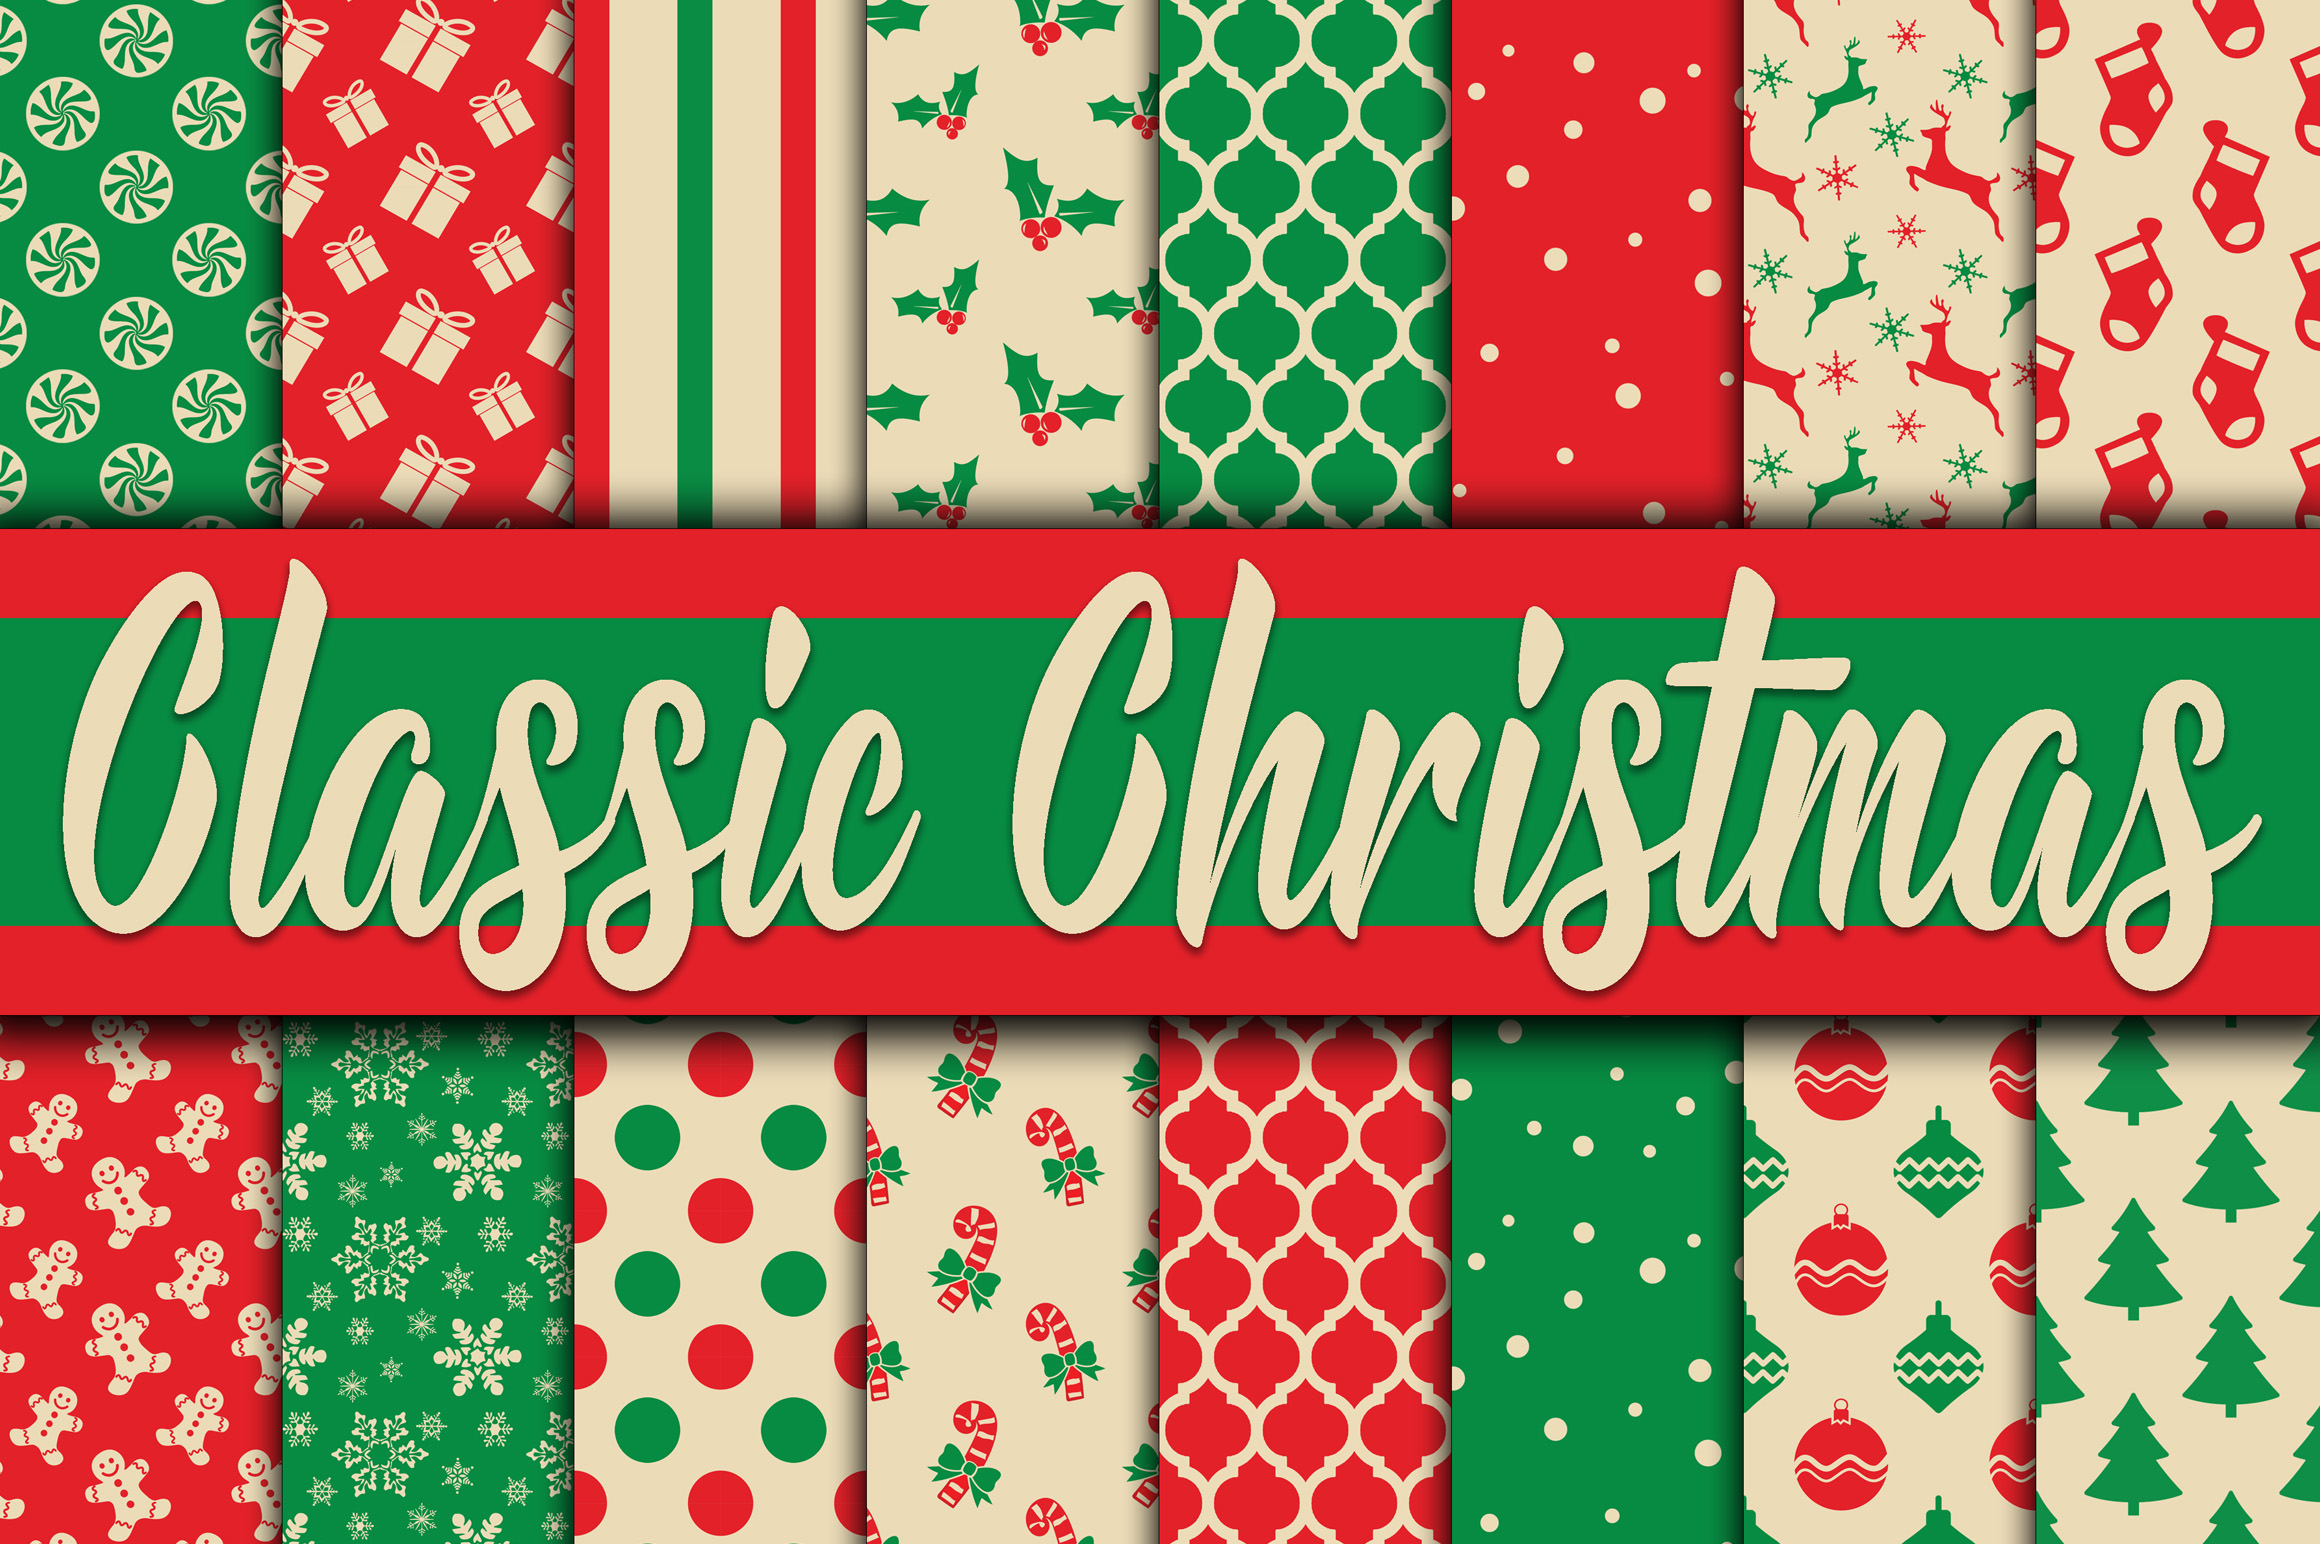 Classic Christmas Digital Paper by Old | Design Bundles